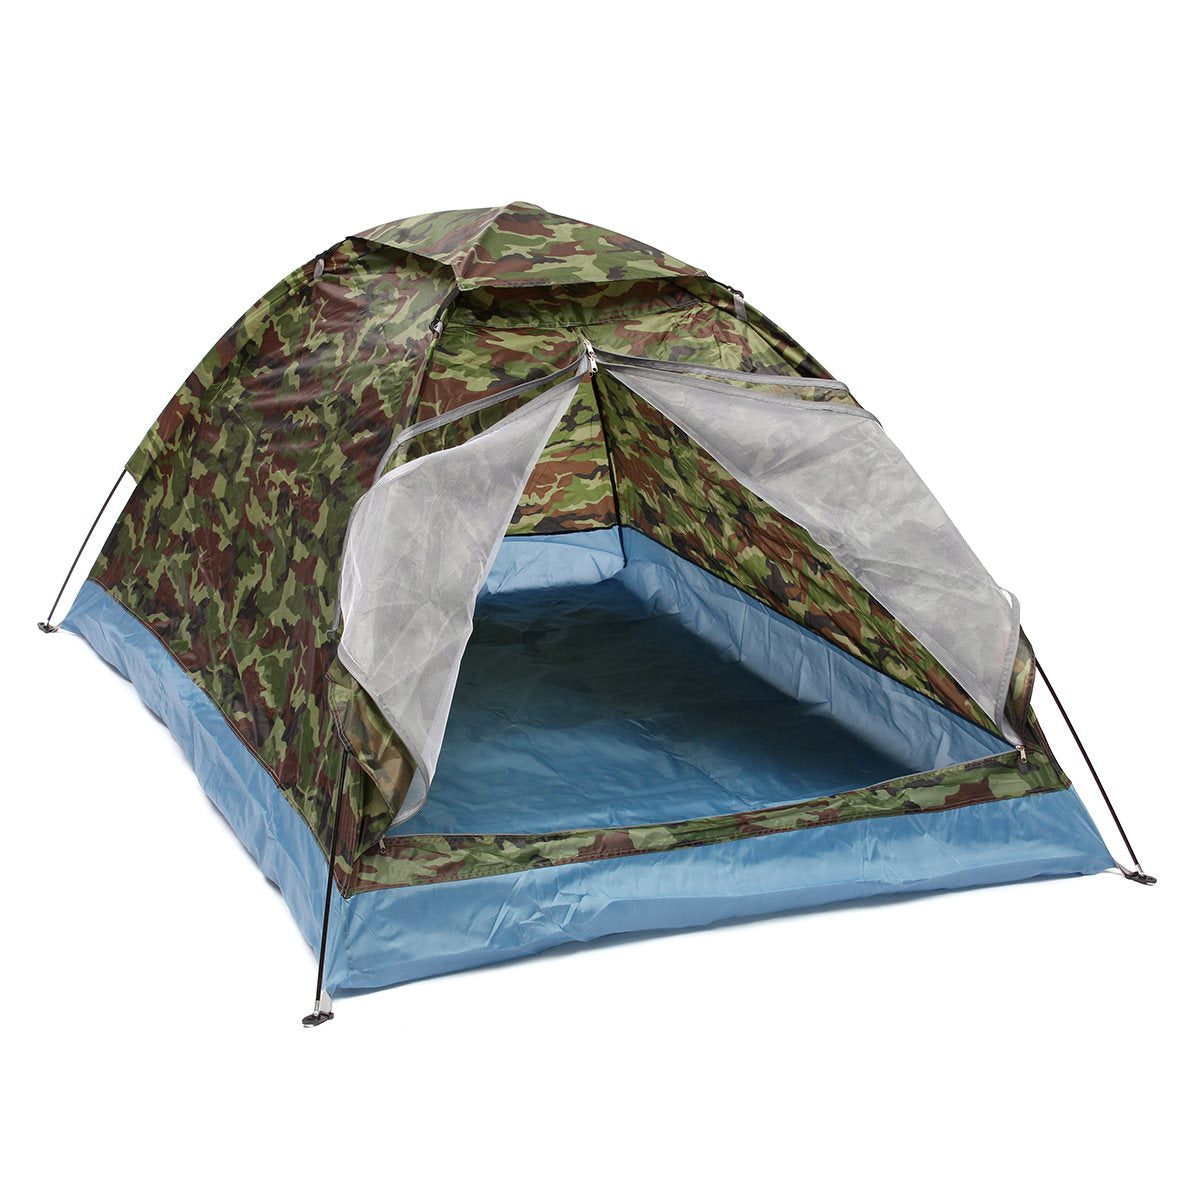 Outdoor 200*140*110cm Oxford cloth PU waterproof coating 4 seasons 2 people single layer Camouflage camping hiking tent